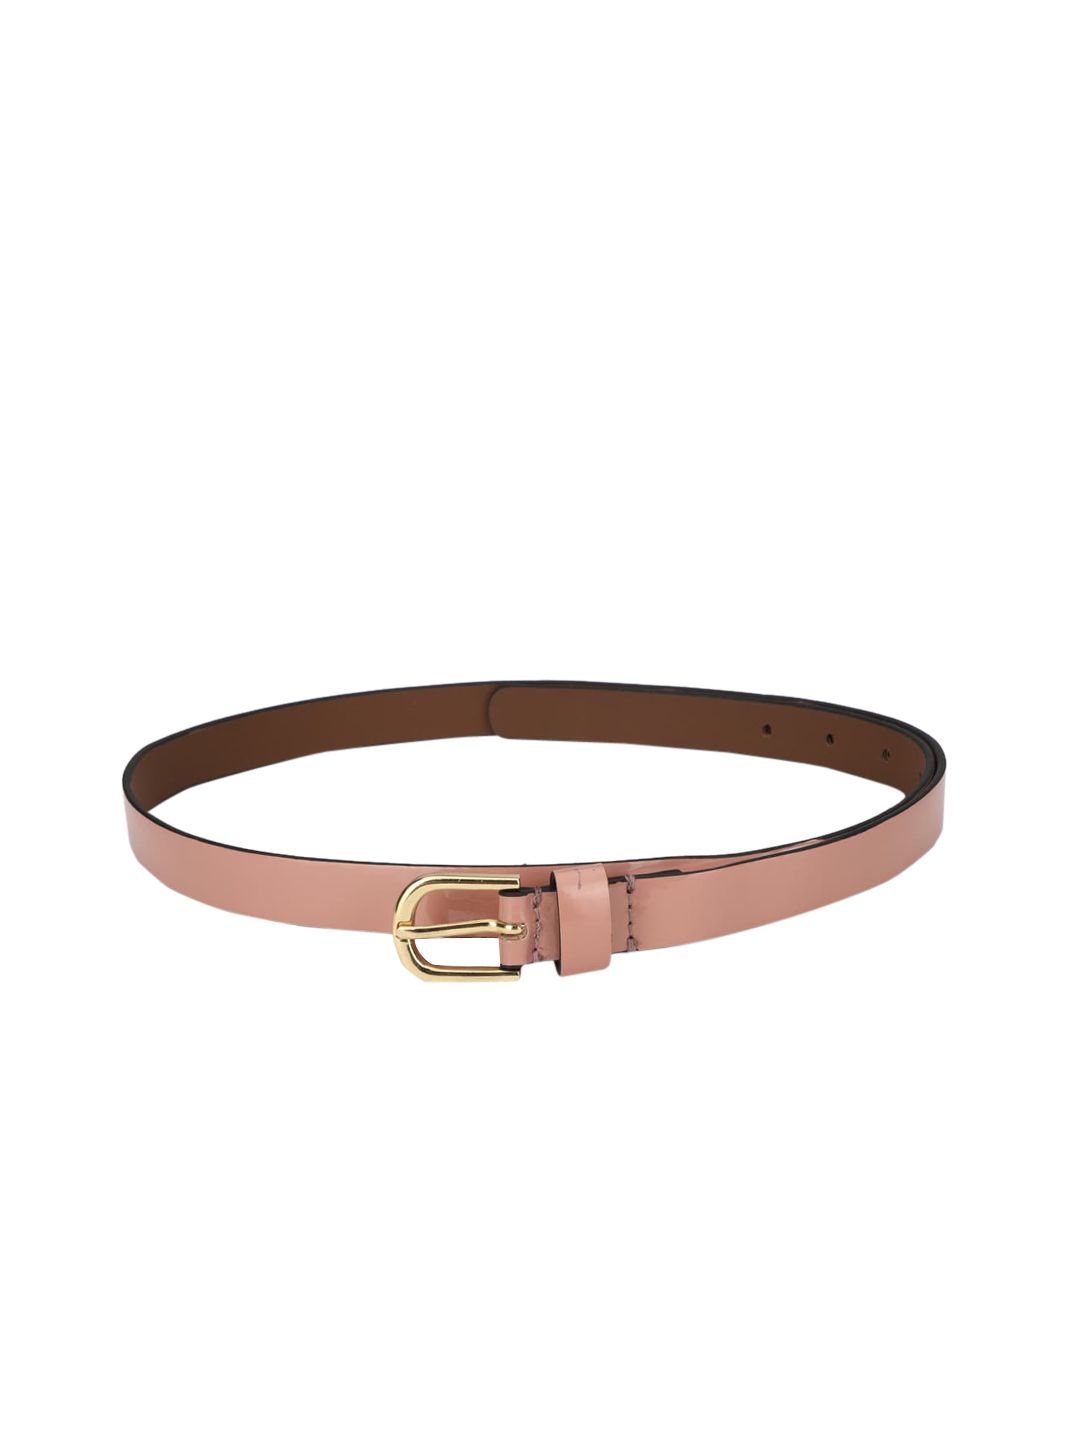 FOREVER 21 Women Pink Solid PU Belt Price in India